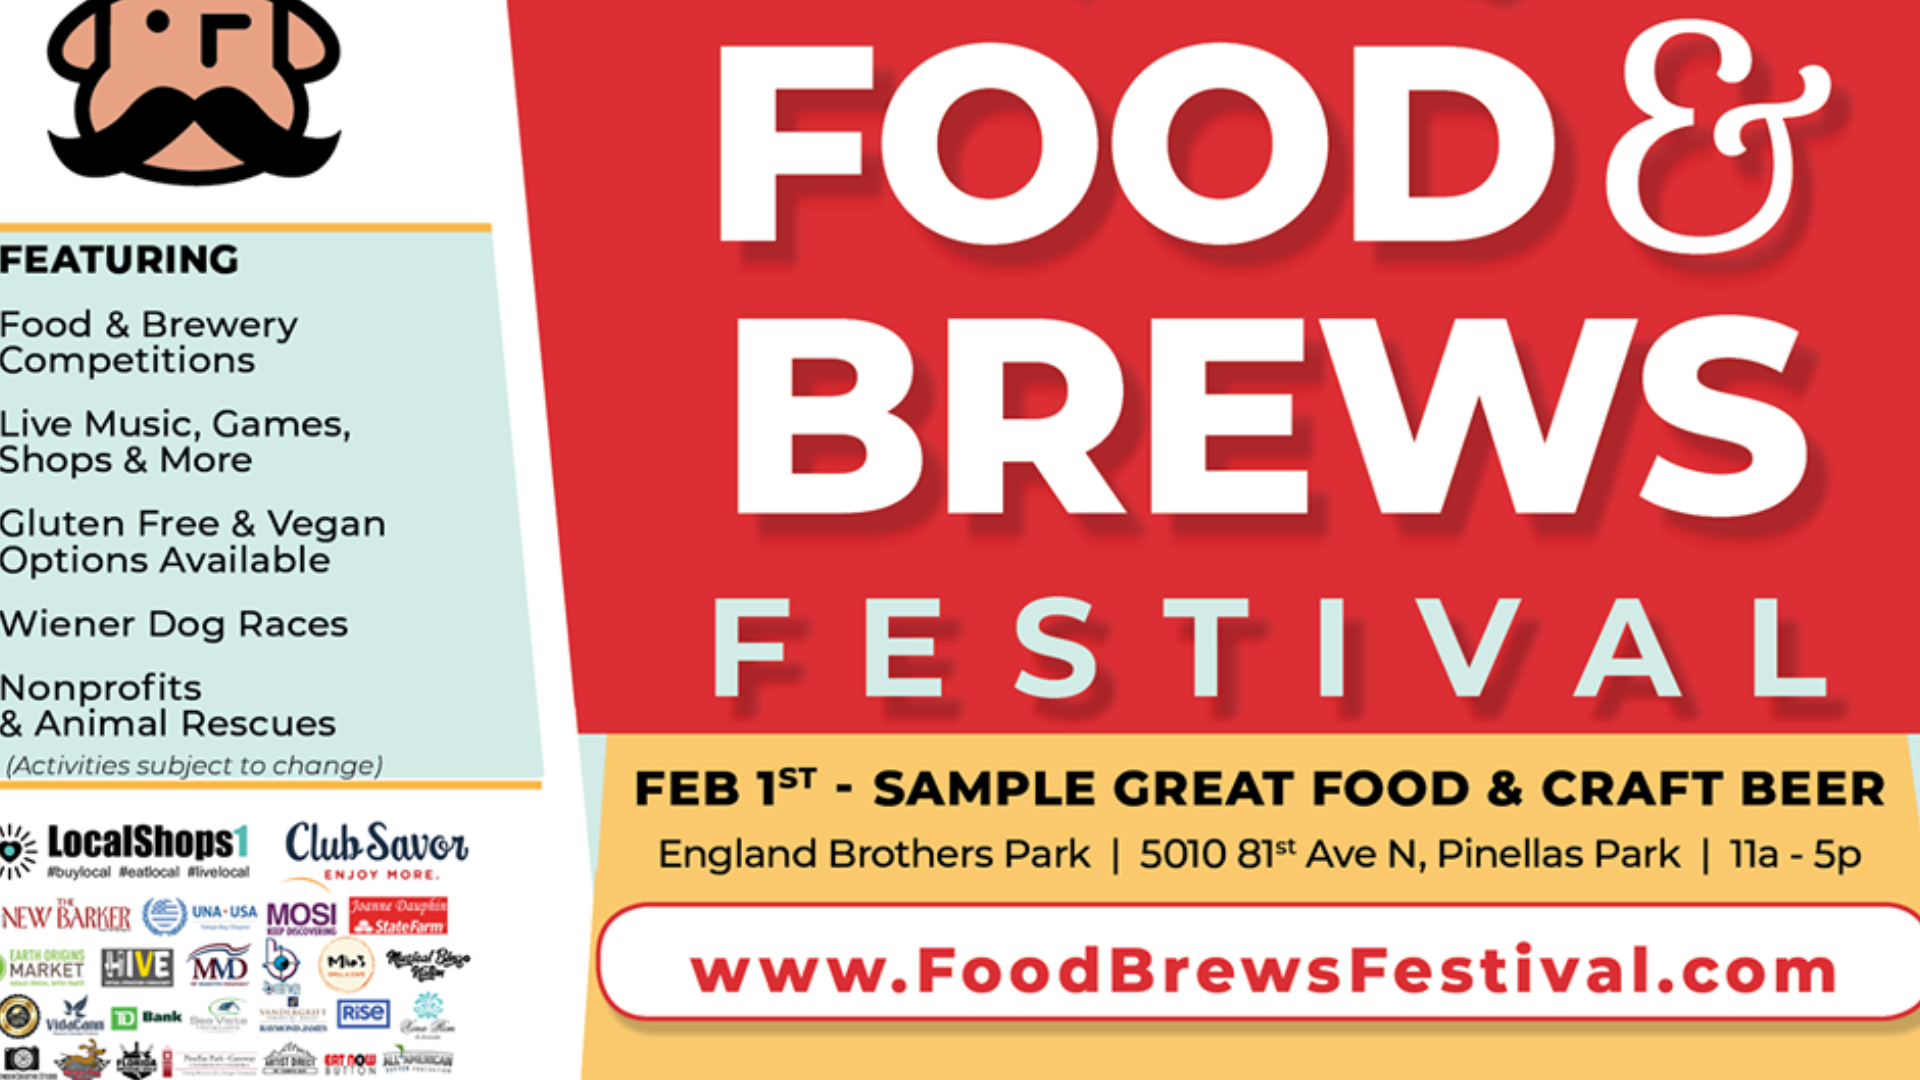 2nd annual Food and Brews Festival in Pinellas Park